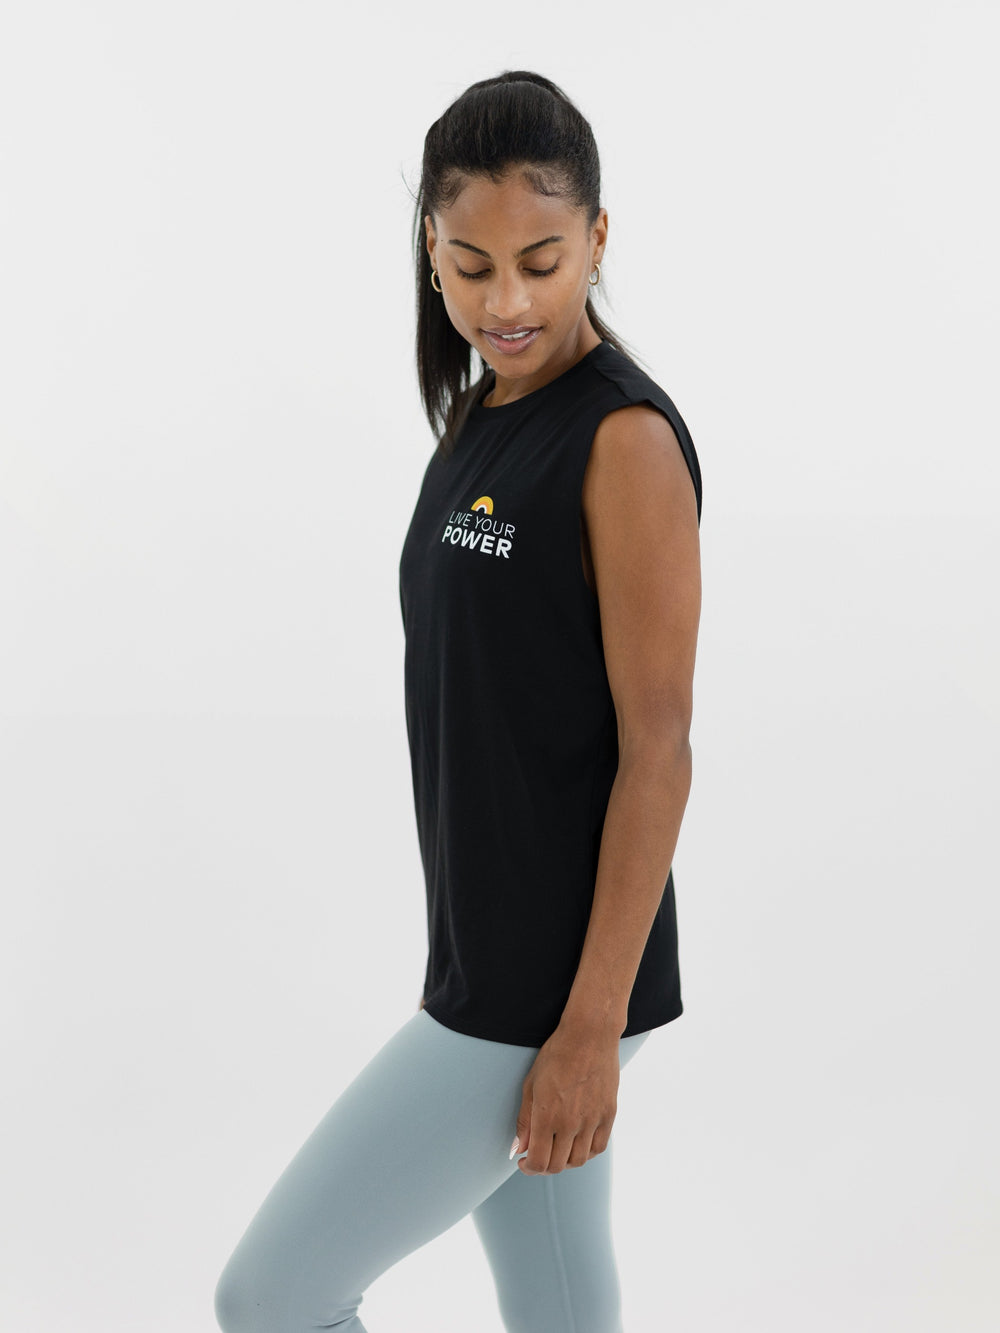 CorePower Yoga Unisex Live Your Power Muscle Tank